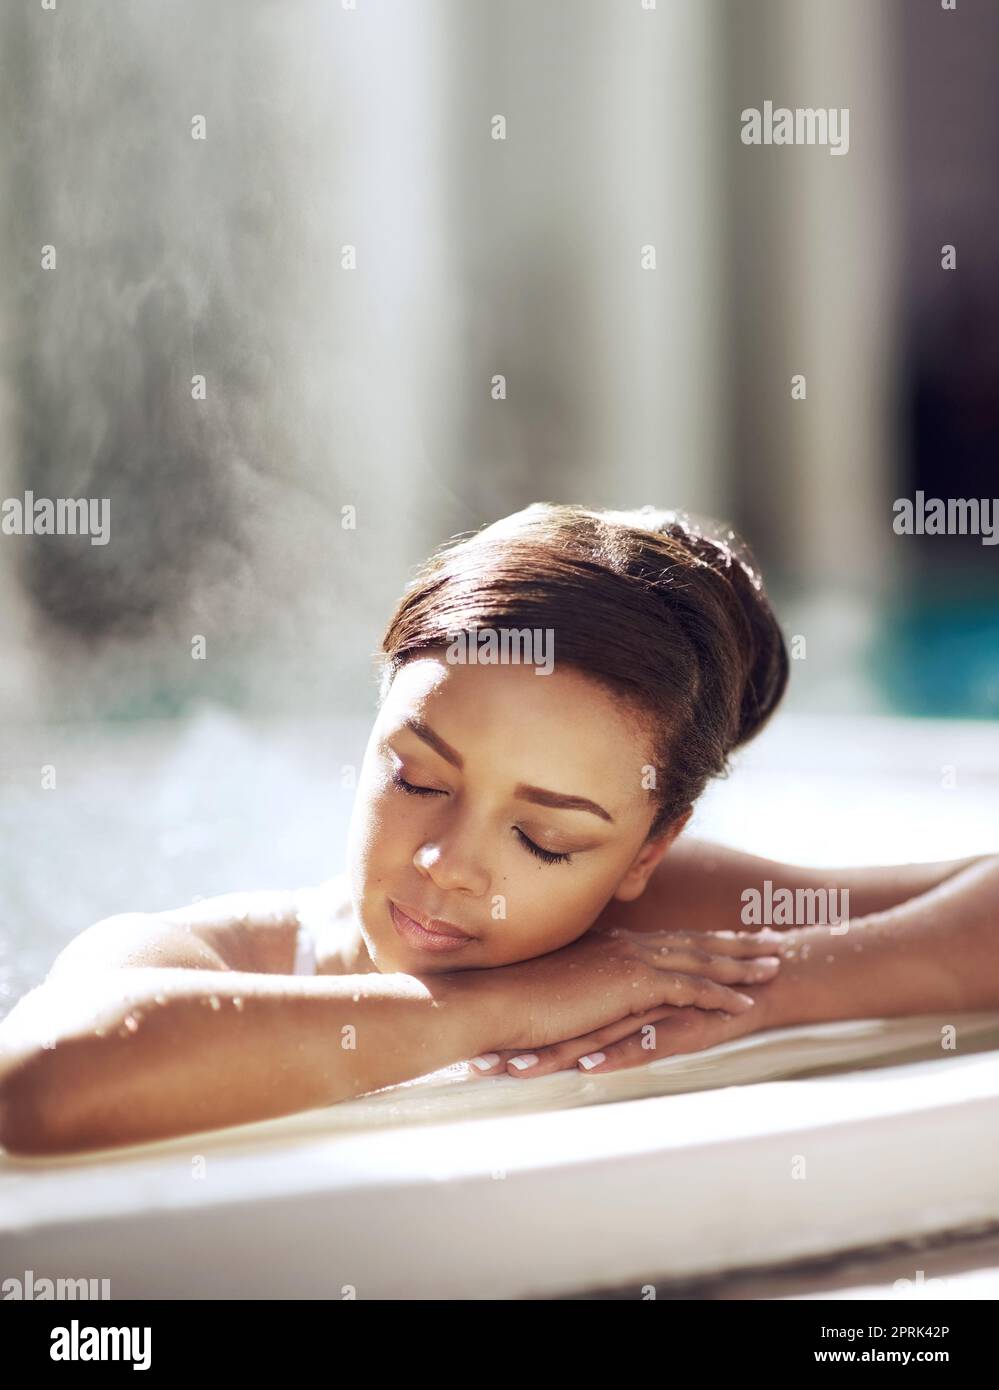 Today is for being pampered. a beautiful young woman at the beauty spa. Stock Photo